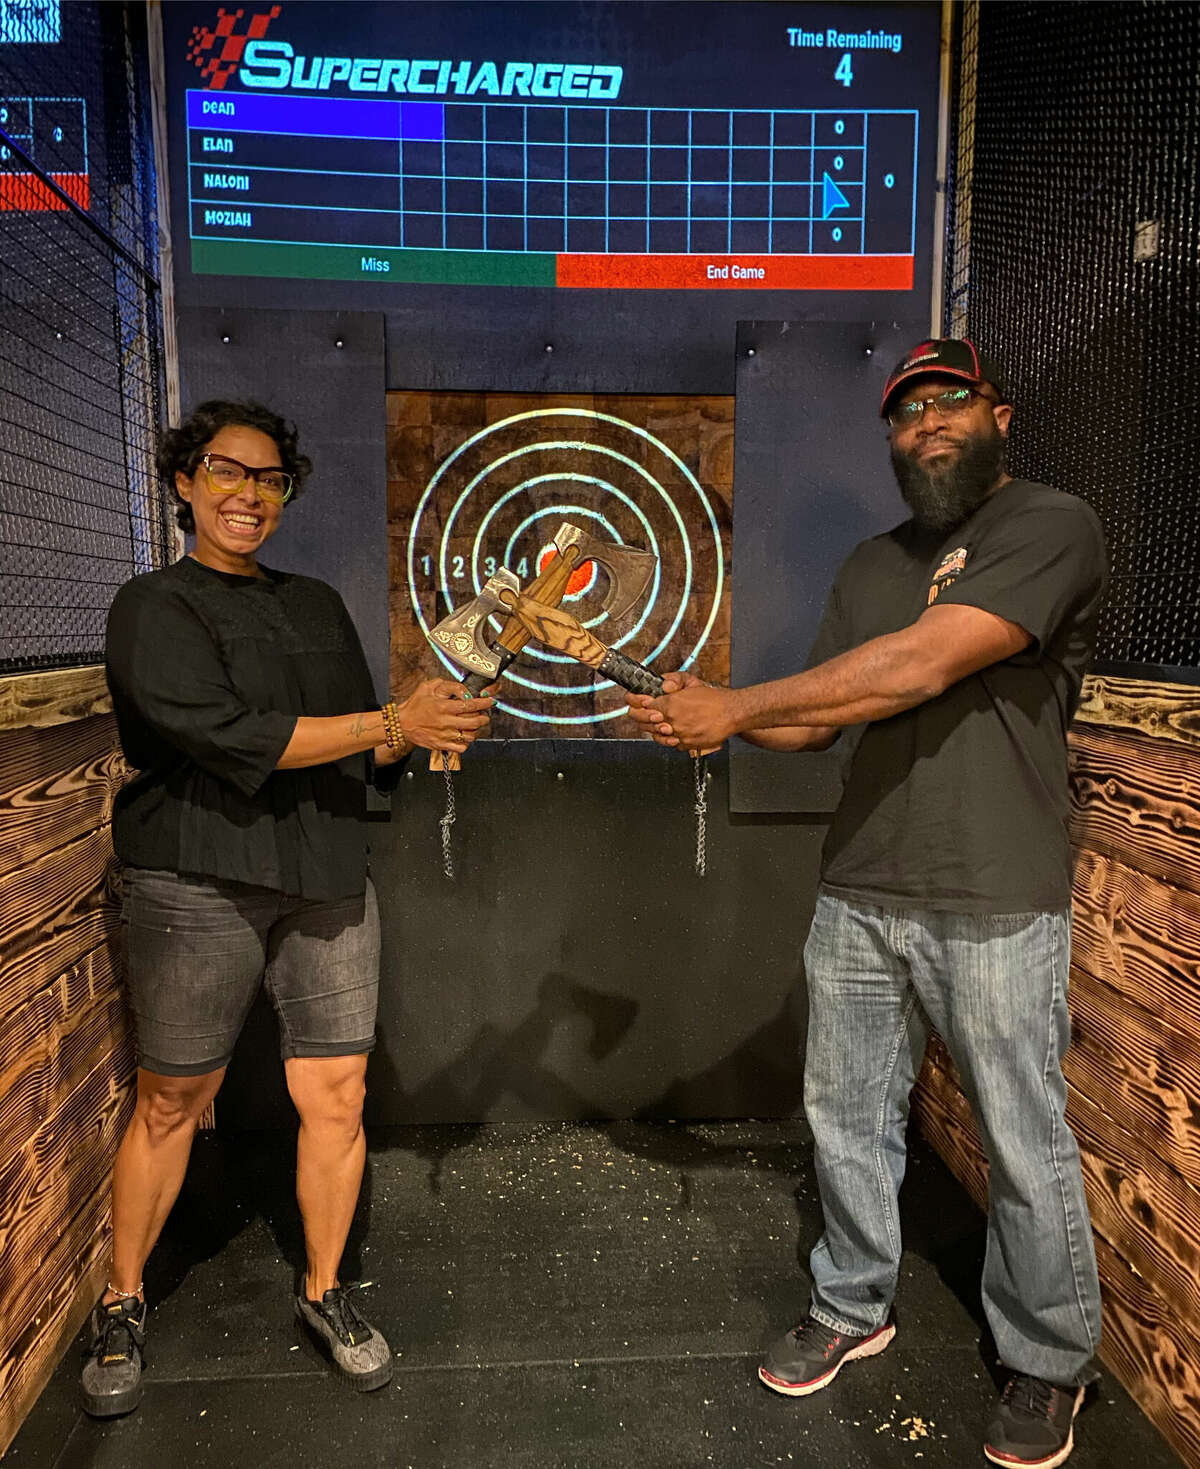 Supercharged in Montville is a one-stop adventure experience complete with axe throwing (pictured), a Ninja Wipeout course, Trampoline Park, and Kiddie Arcade.